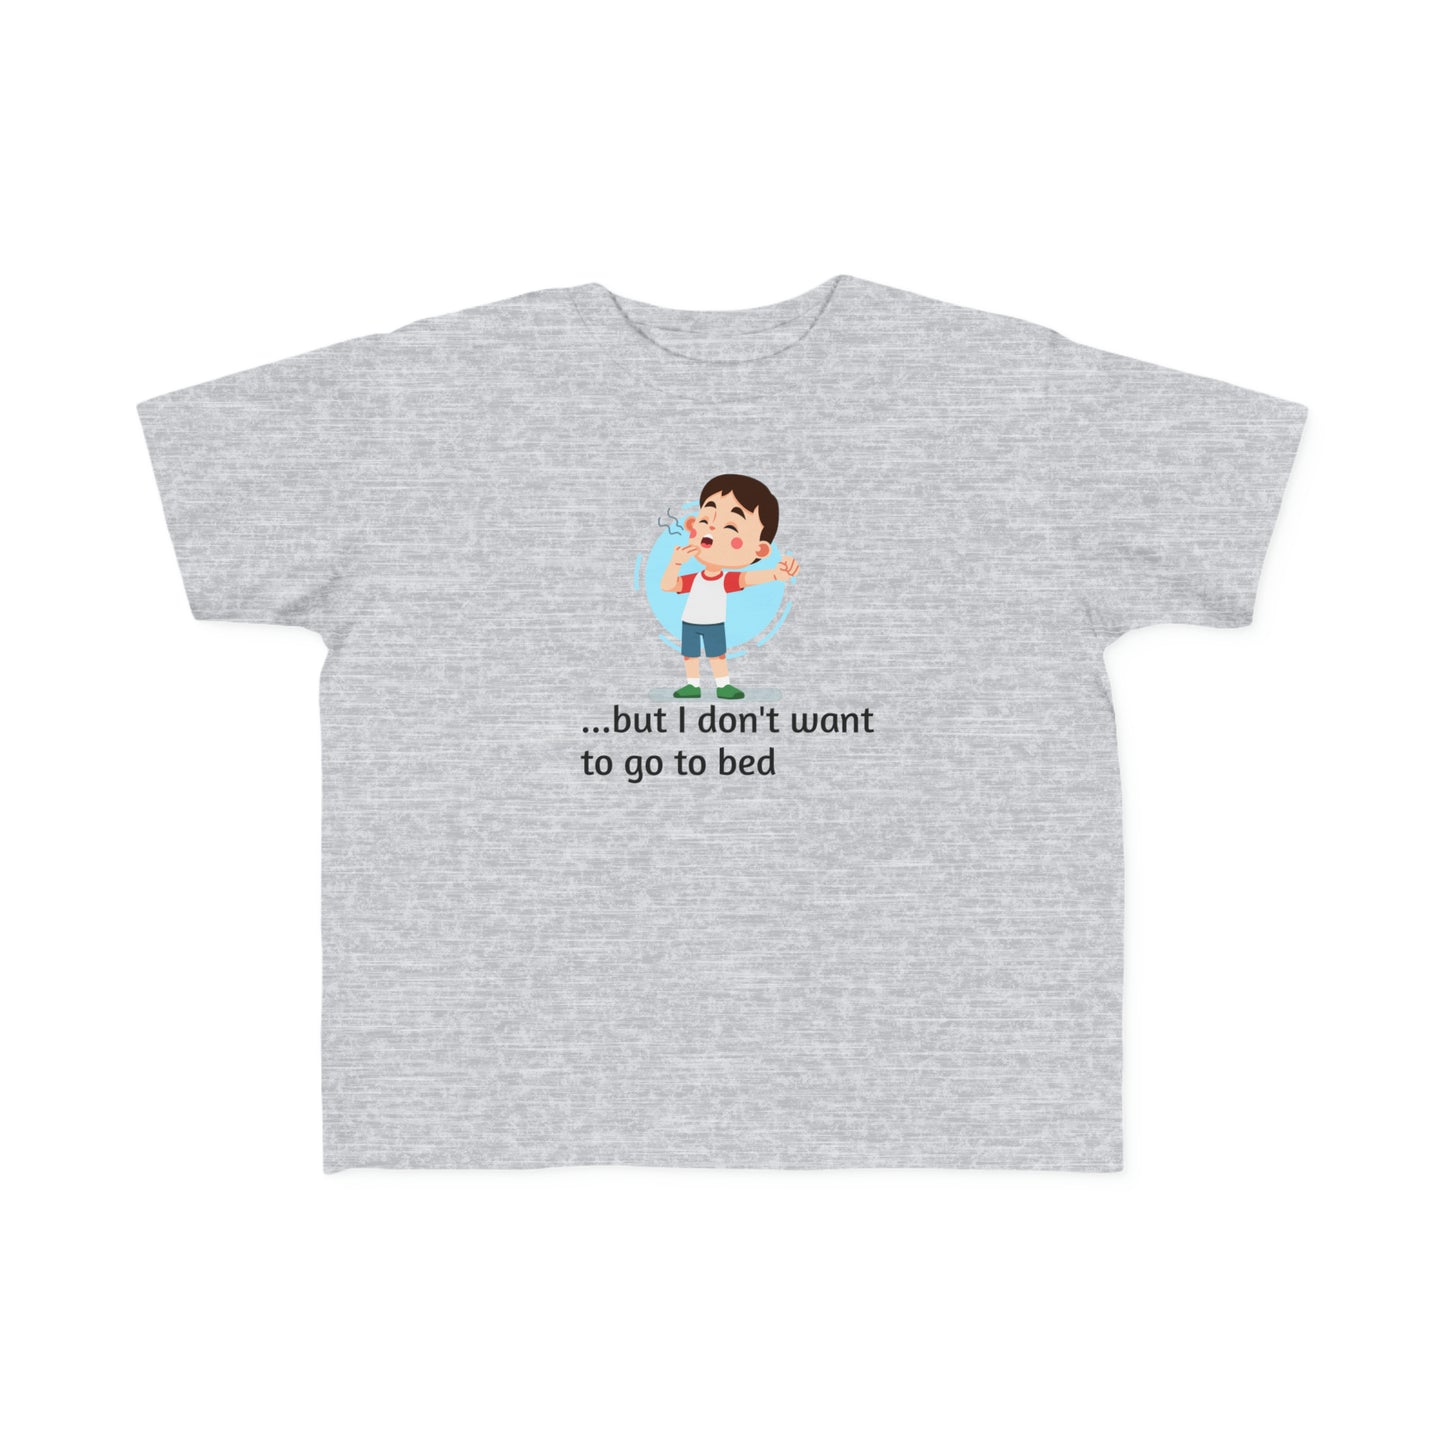 I don't want to go to bed Toddler's Fine Jersey Tee